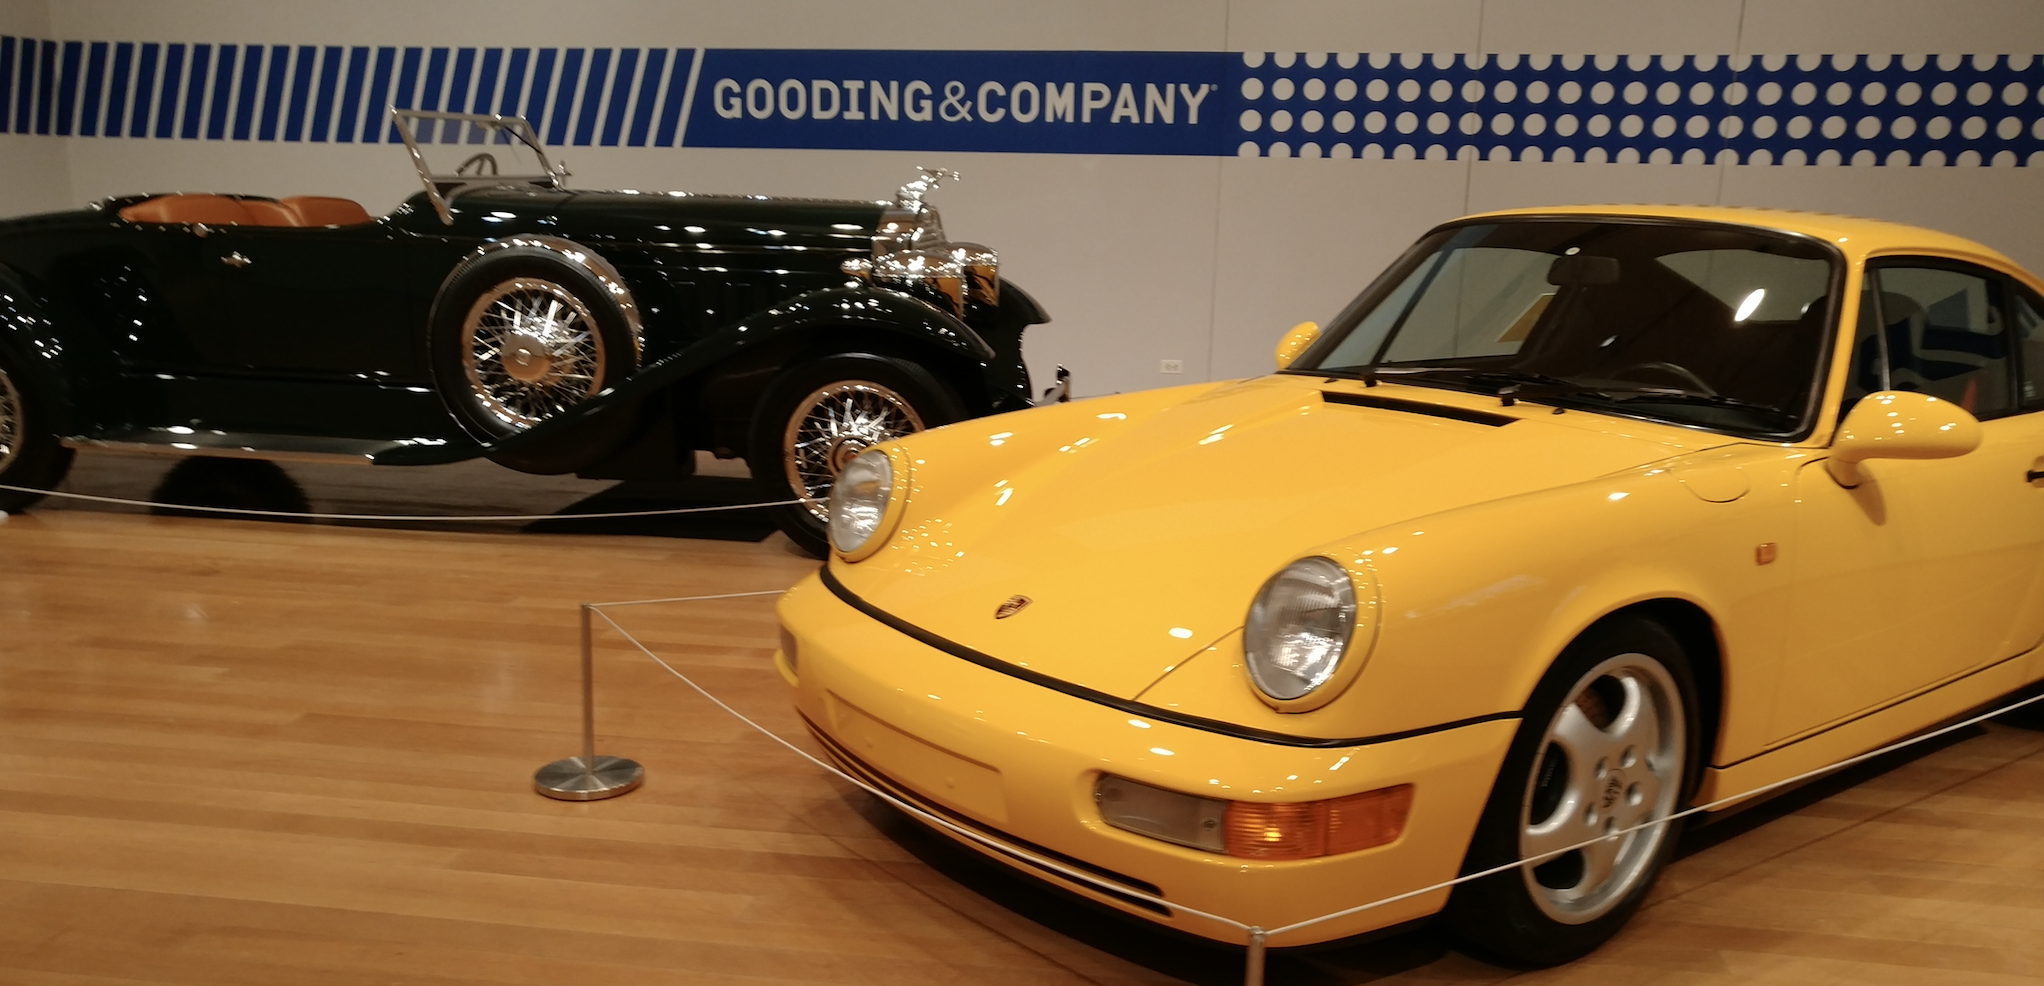 A 1930 Packard 734 Speedster Runabout and 1967 Porsche 911 2.0 S which were on display at Christie's courtesy of Gooding & Company. (RCL)